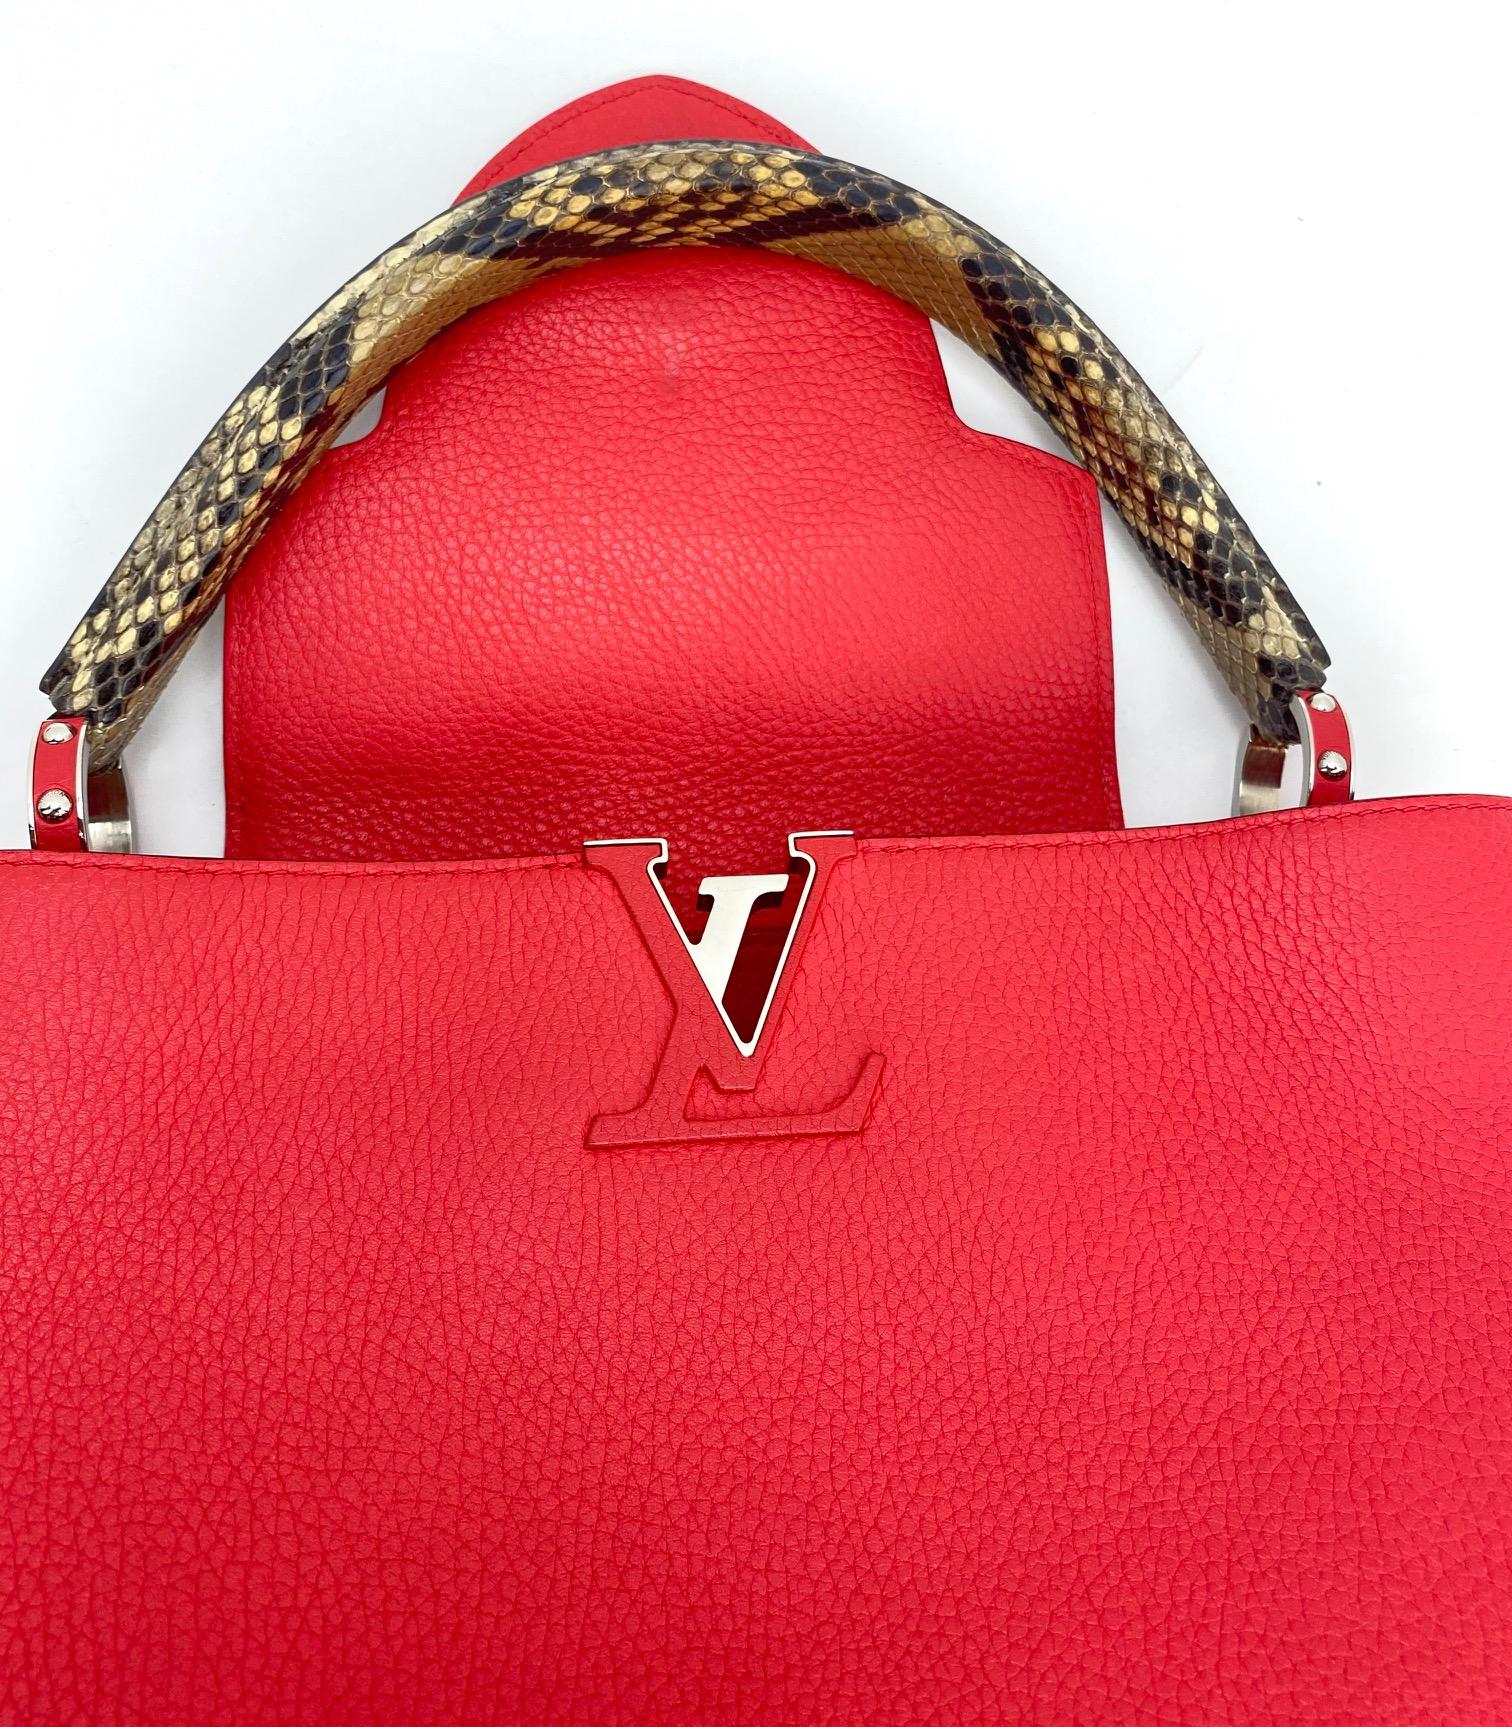 LOUIS VUITTON Capucines MM Python Rubis Red Taurillon Leather Hand Shoulder Bag 6